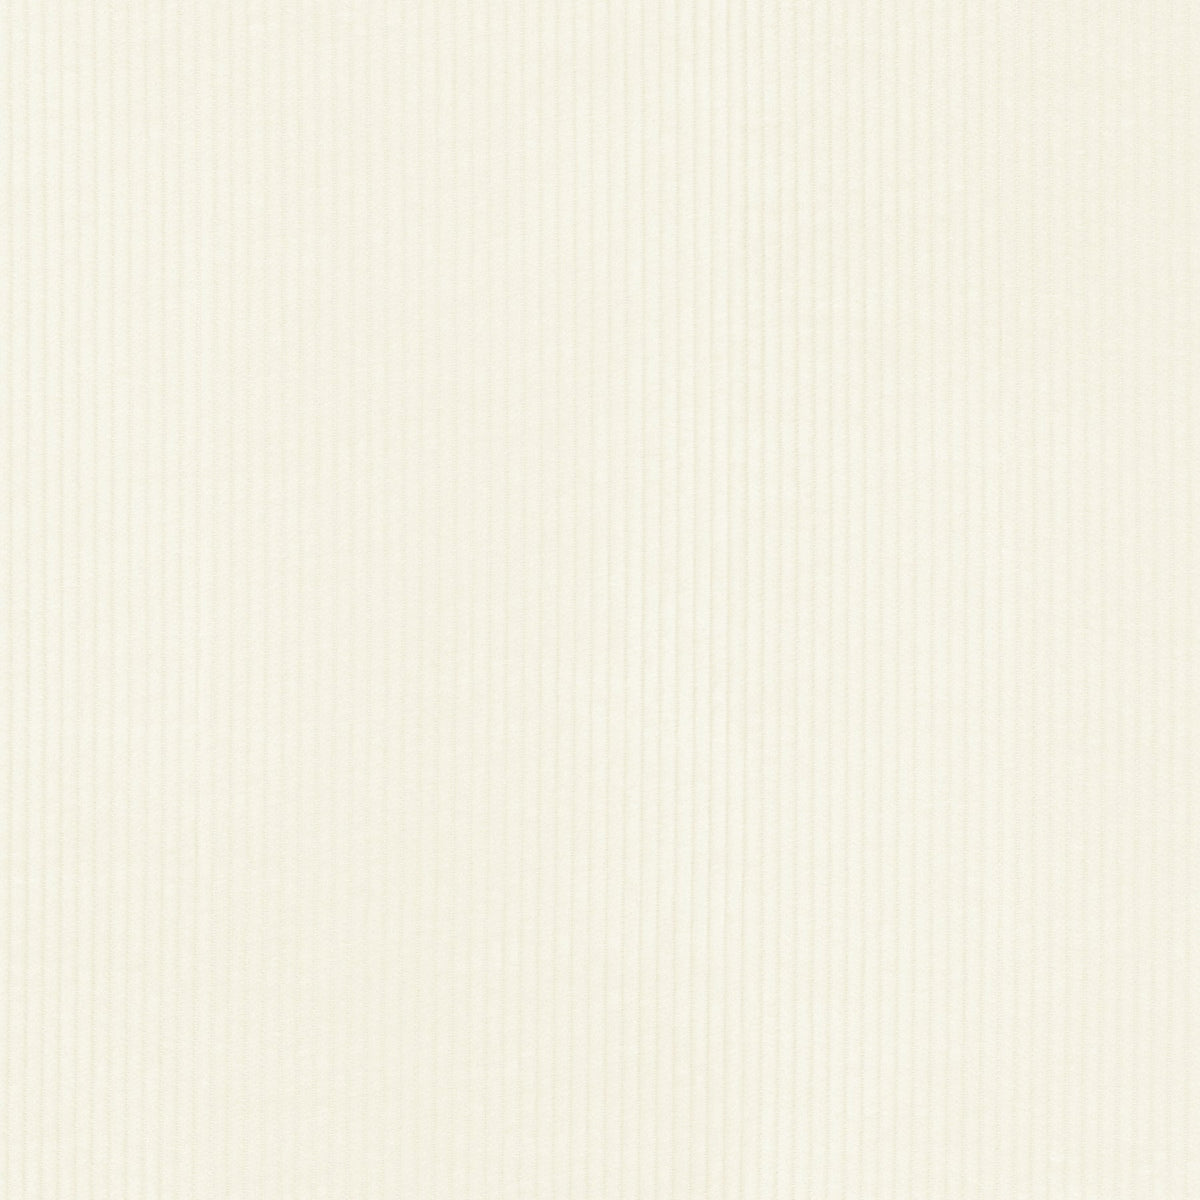 P/K Lifestyles Wales - Coconut 412043 Fabric Swatch